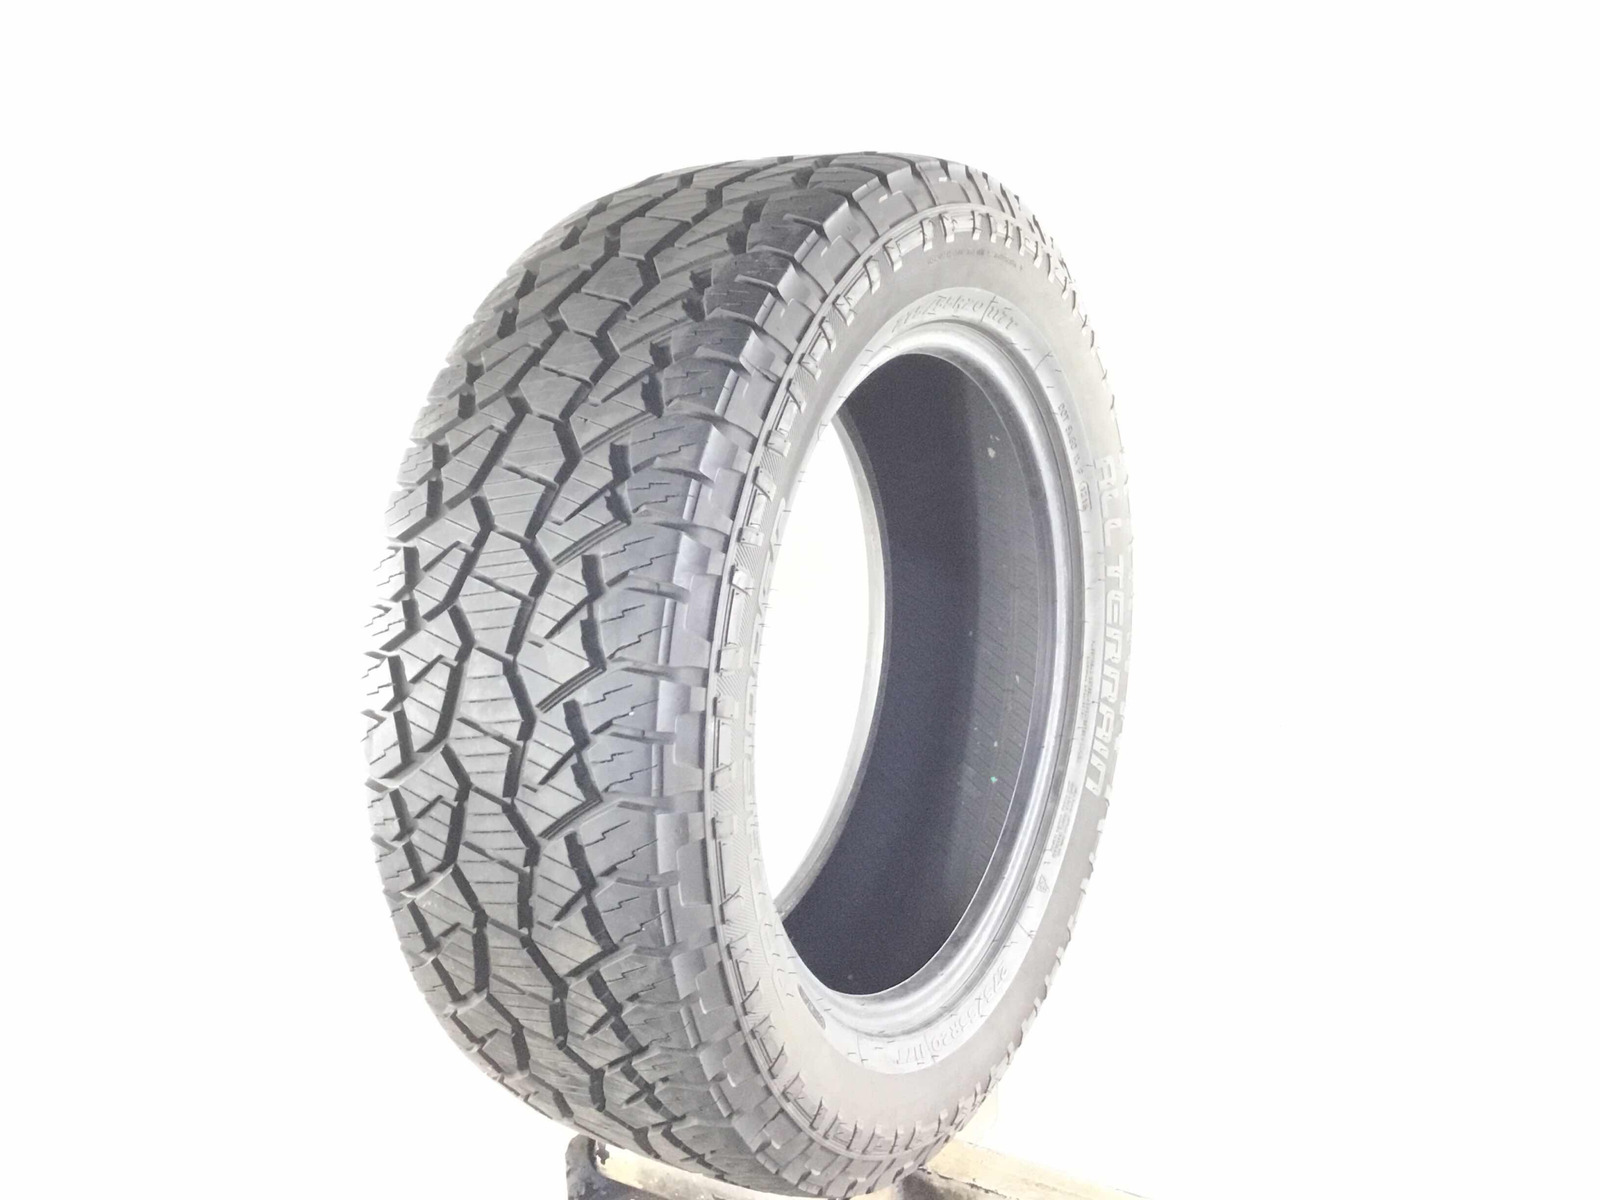 P275/55R20 Pathfinder All Terrain 117 T Used 10/32nds